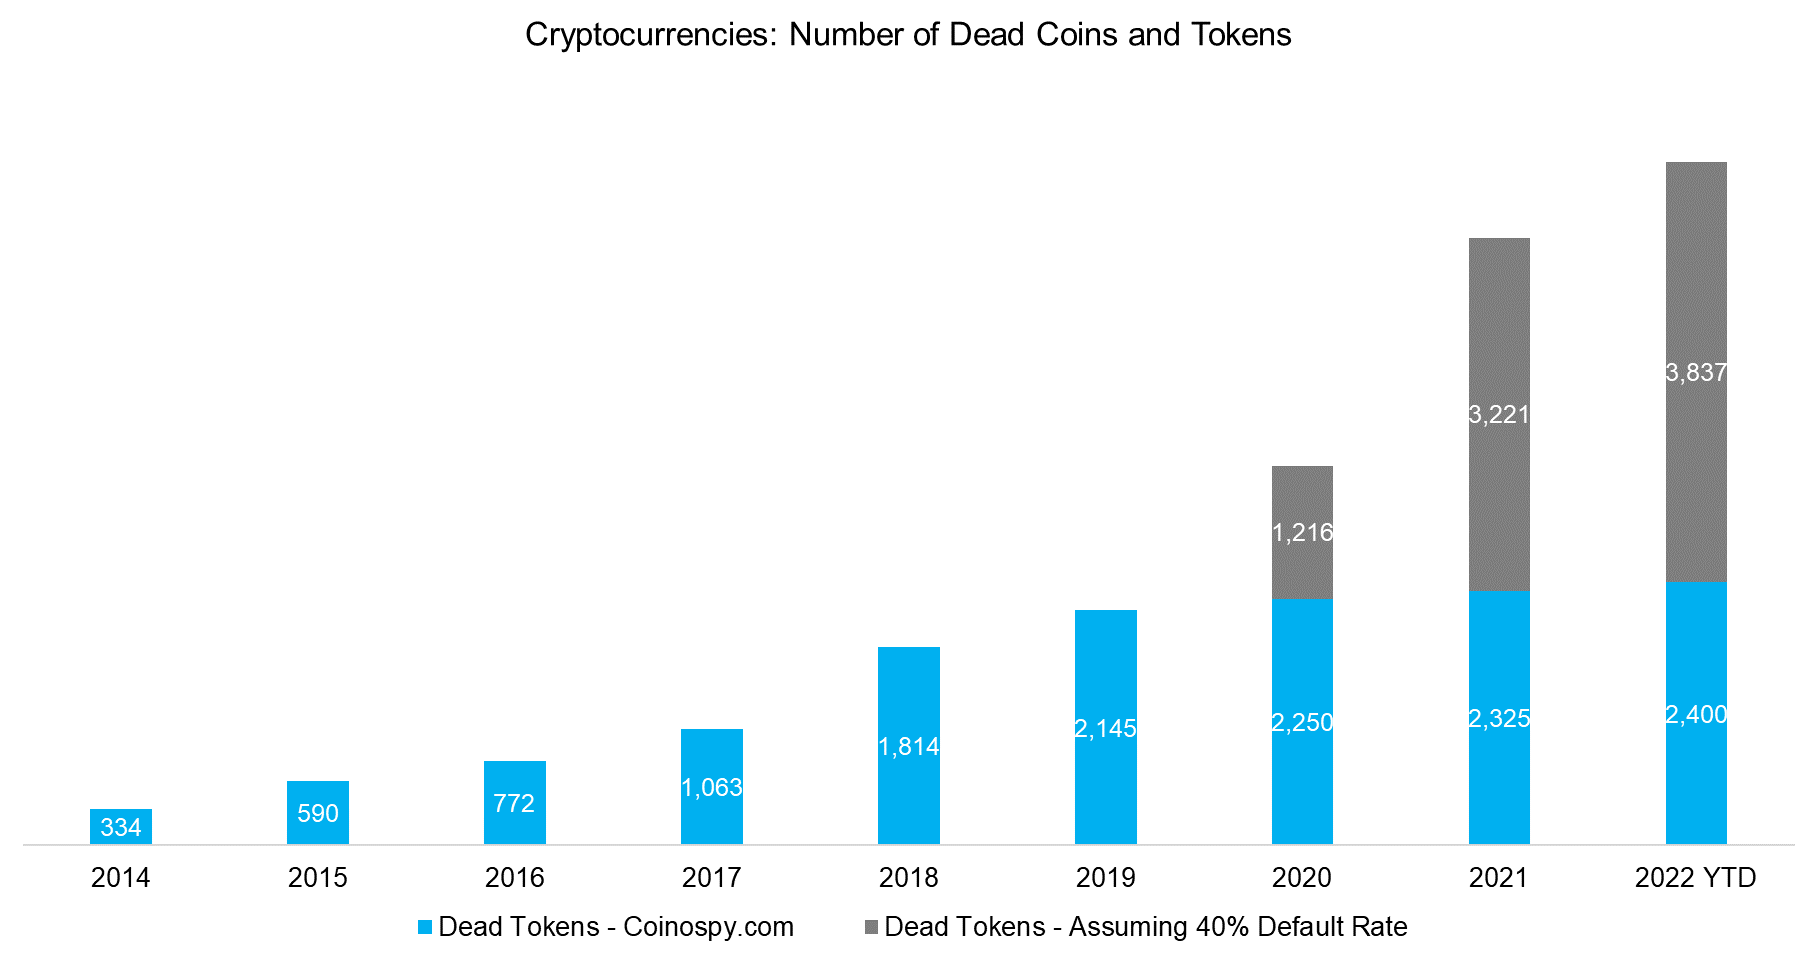 Cryptocurrencies: Number of Dead Coins and Tokens